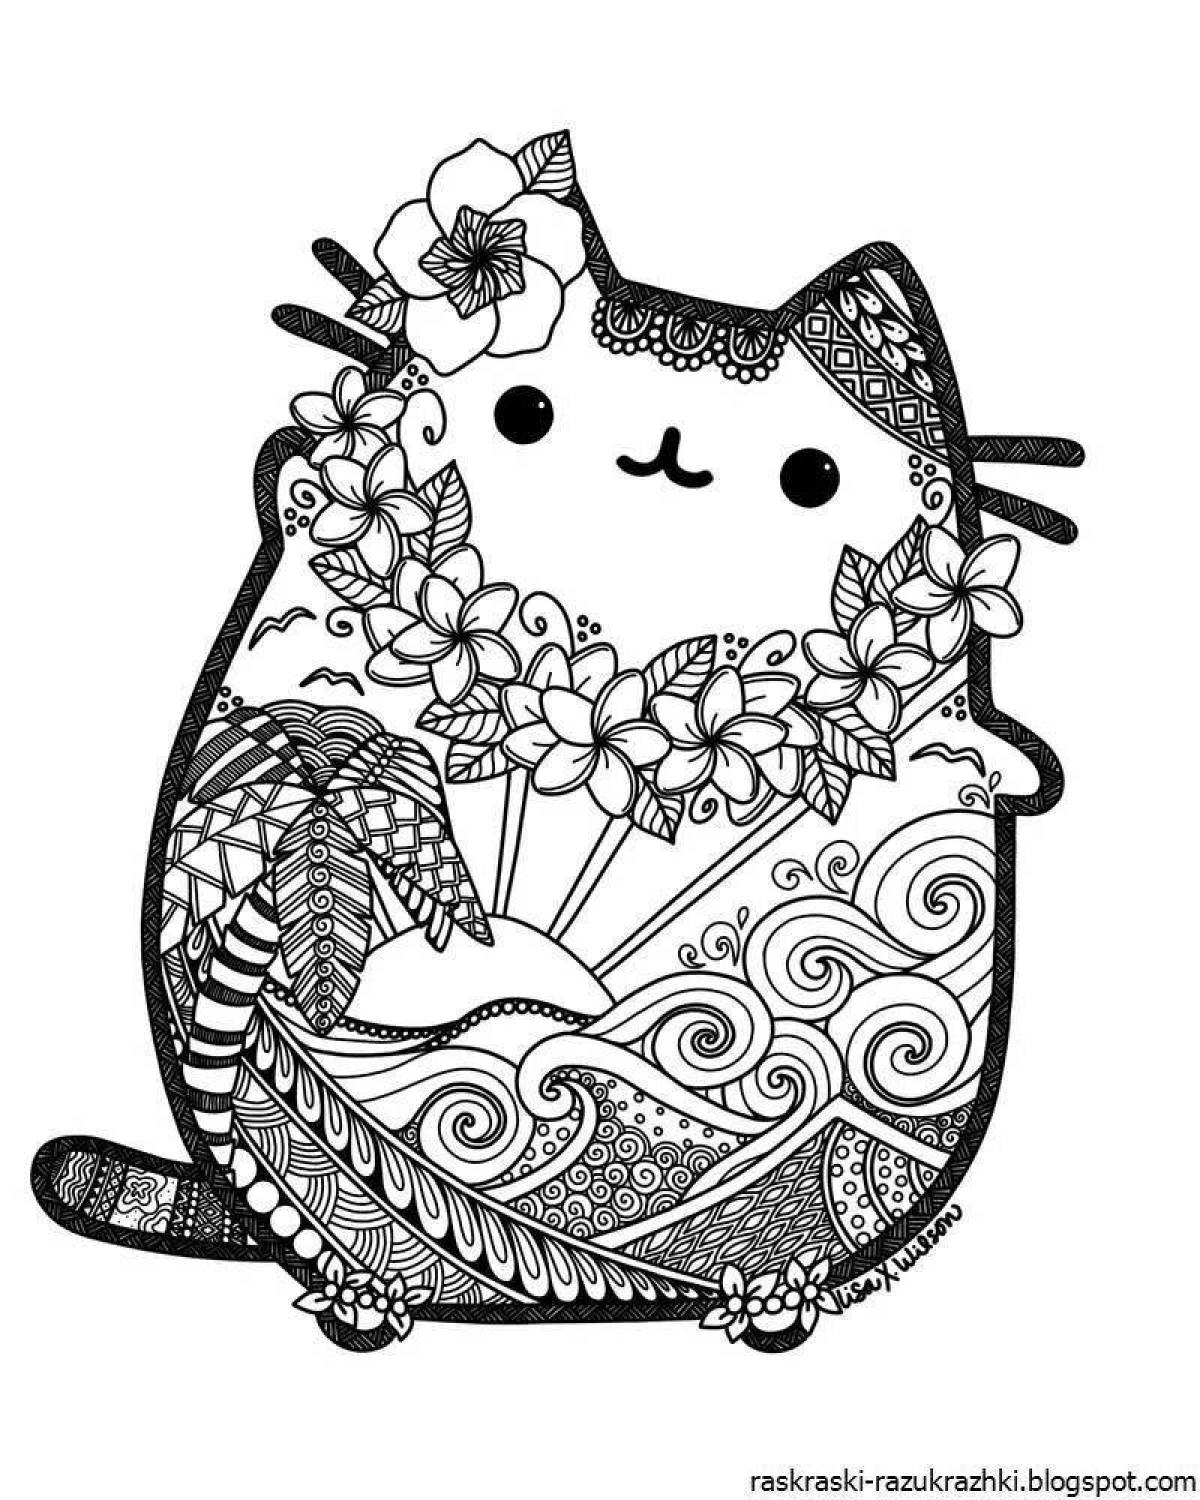 Pusheen's playful coloring page